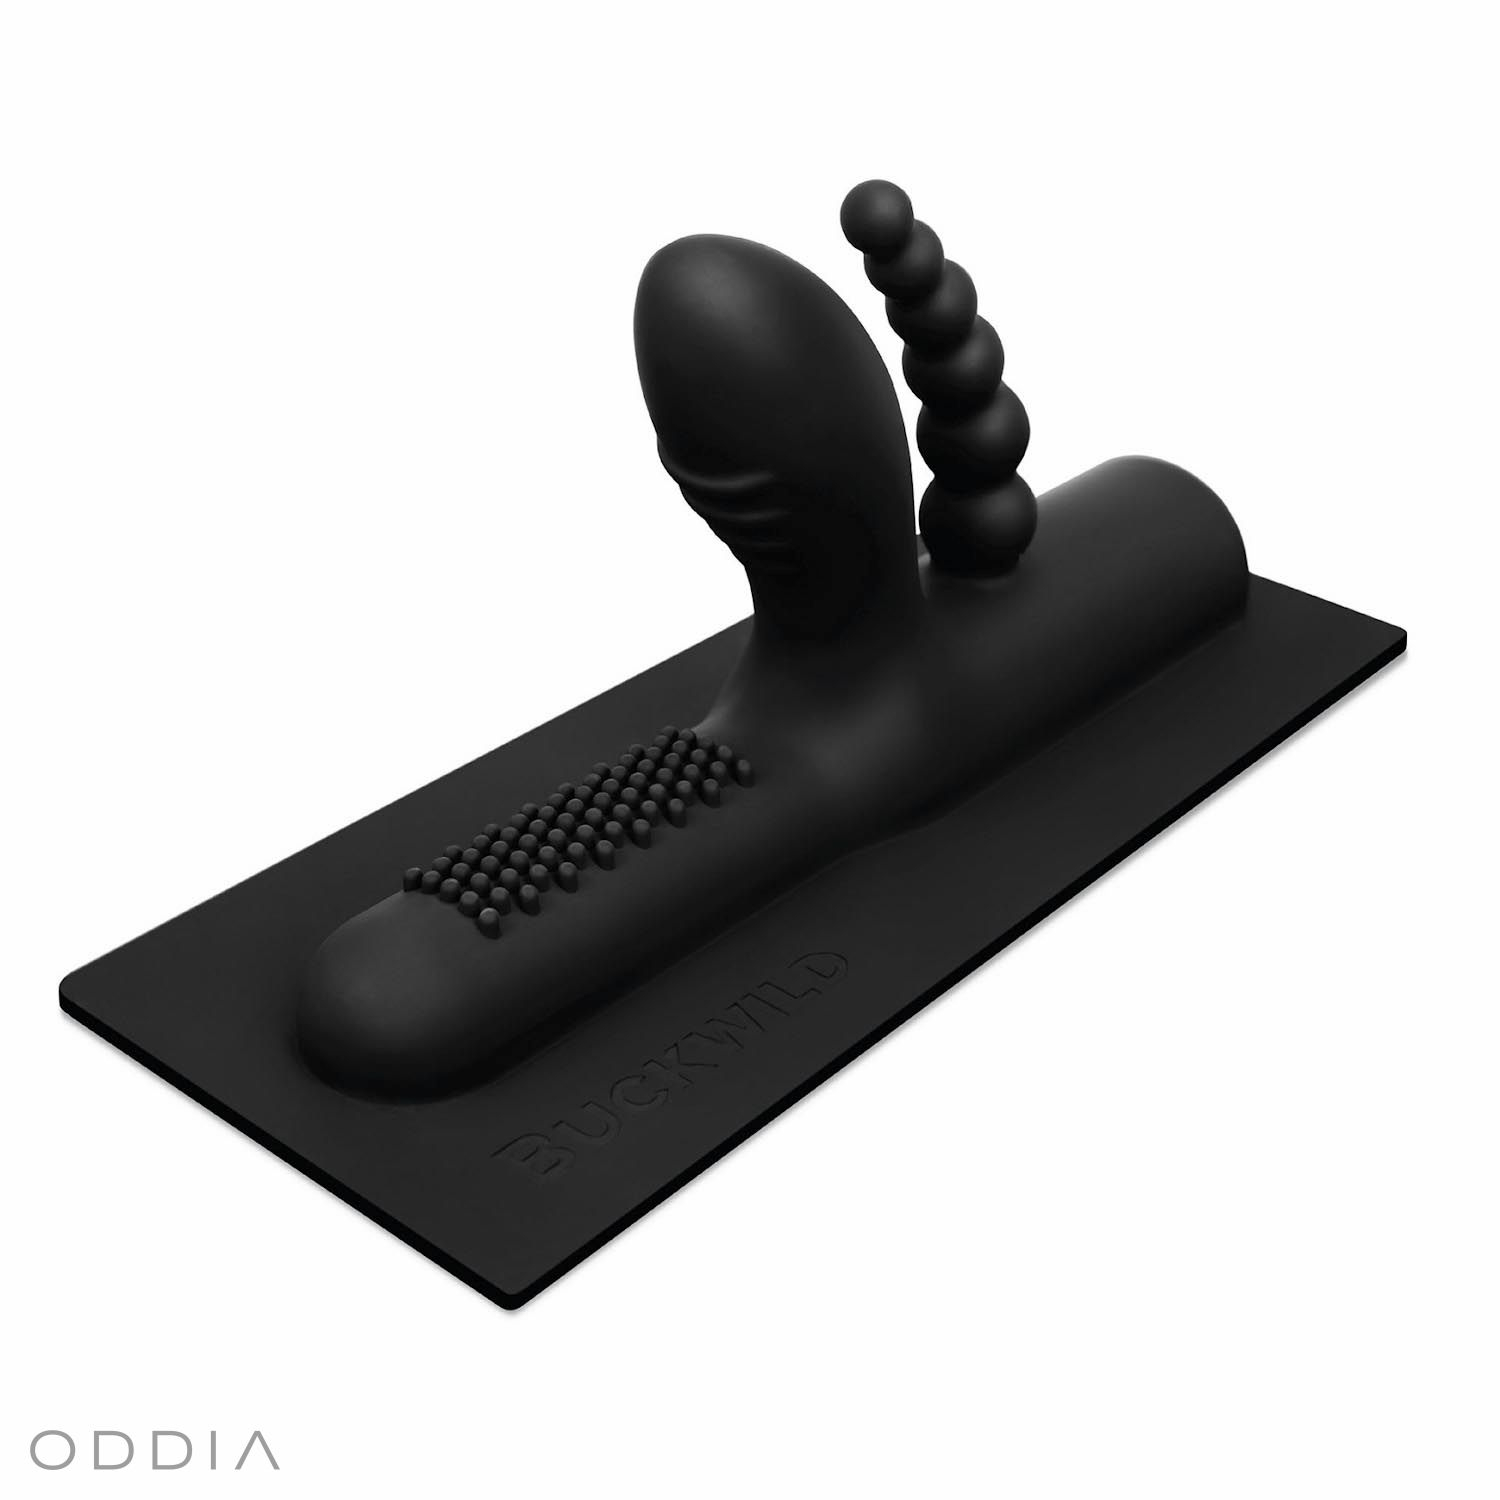 Black attachment for the Cowgirl erotic machine with vaginal and anal protrusion and grooves